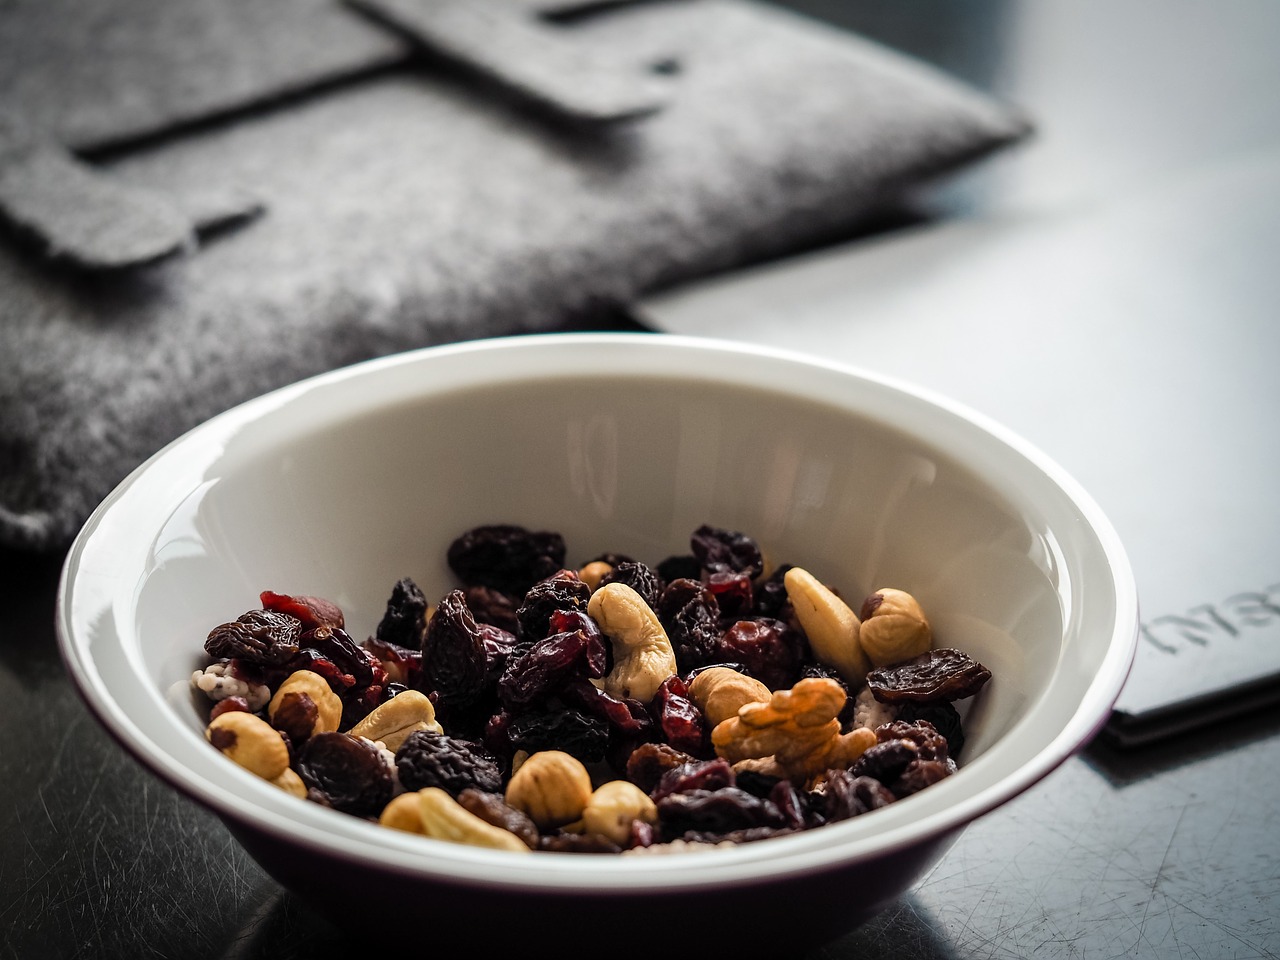 healthy snack of raisins and nuts in a bowl